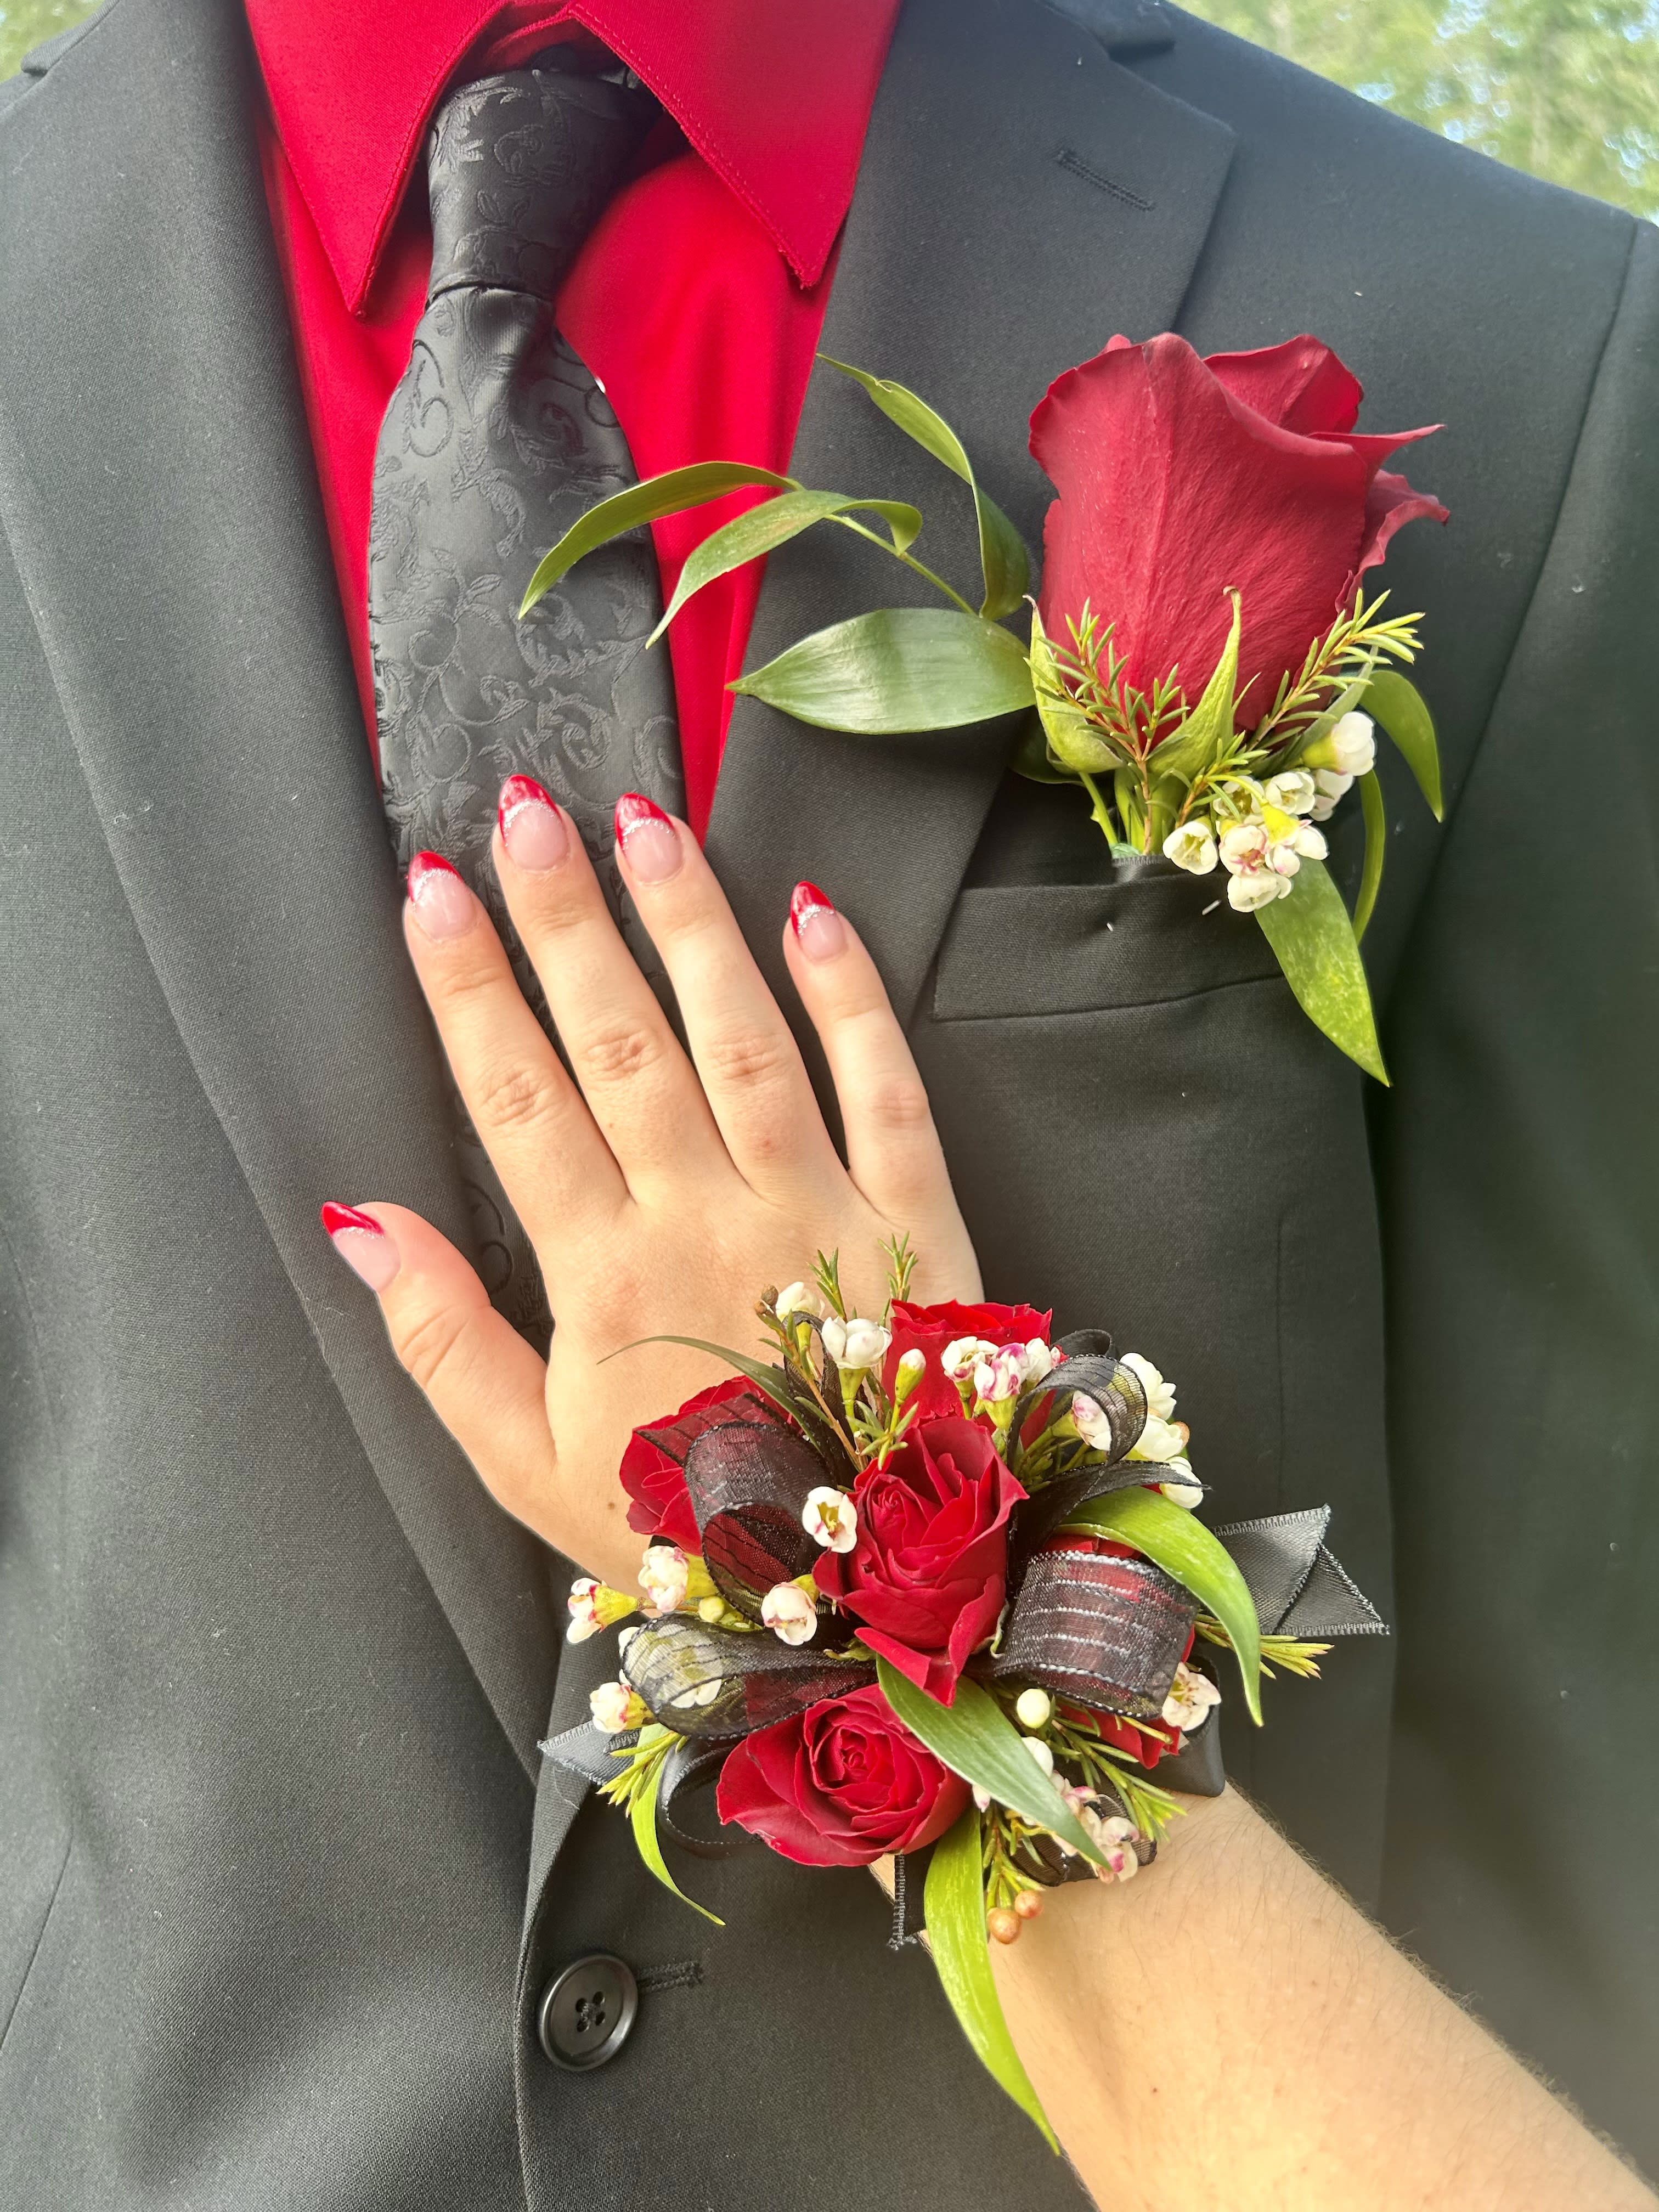 Wristlet Corsage and Lapel Flower / Boutonniere in Altamonte